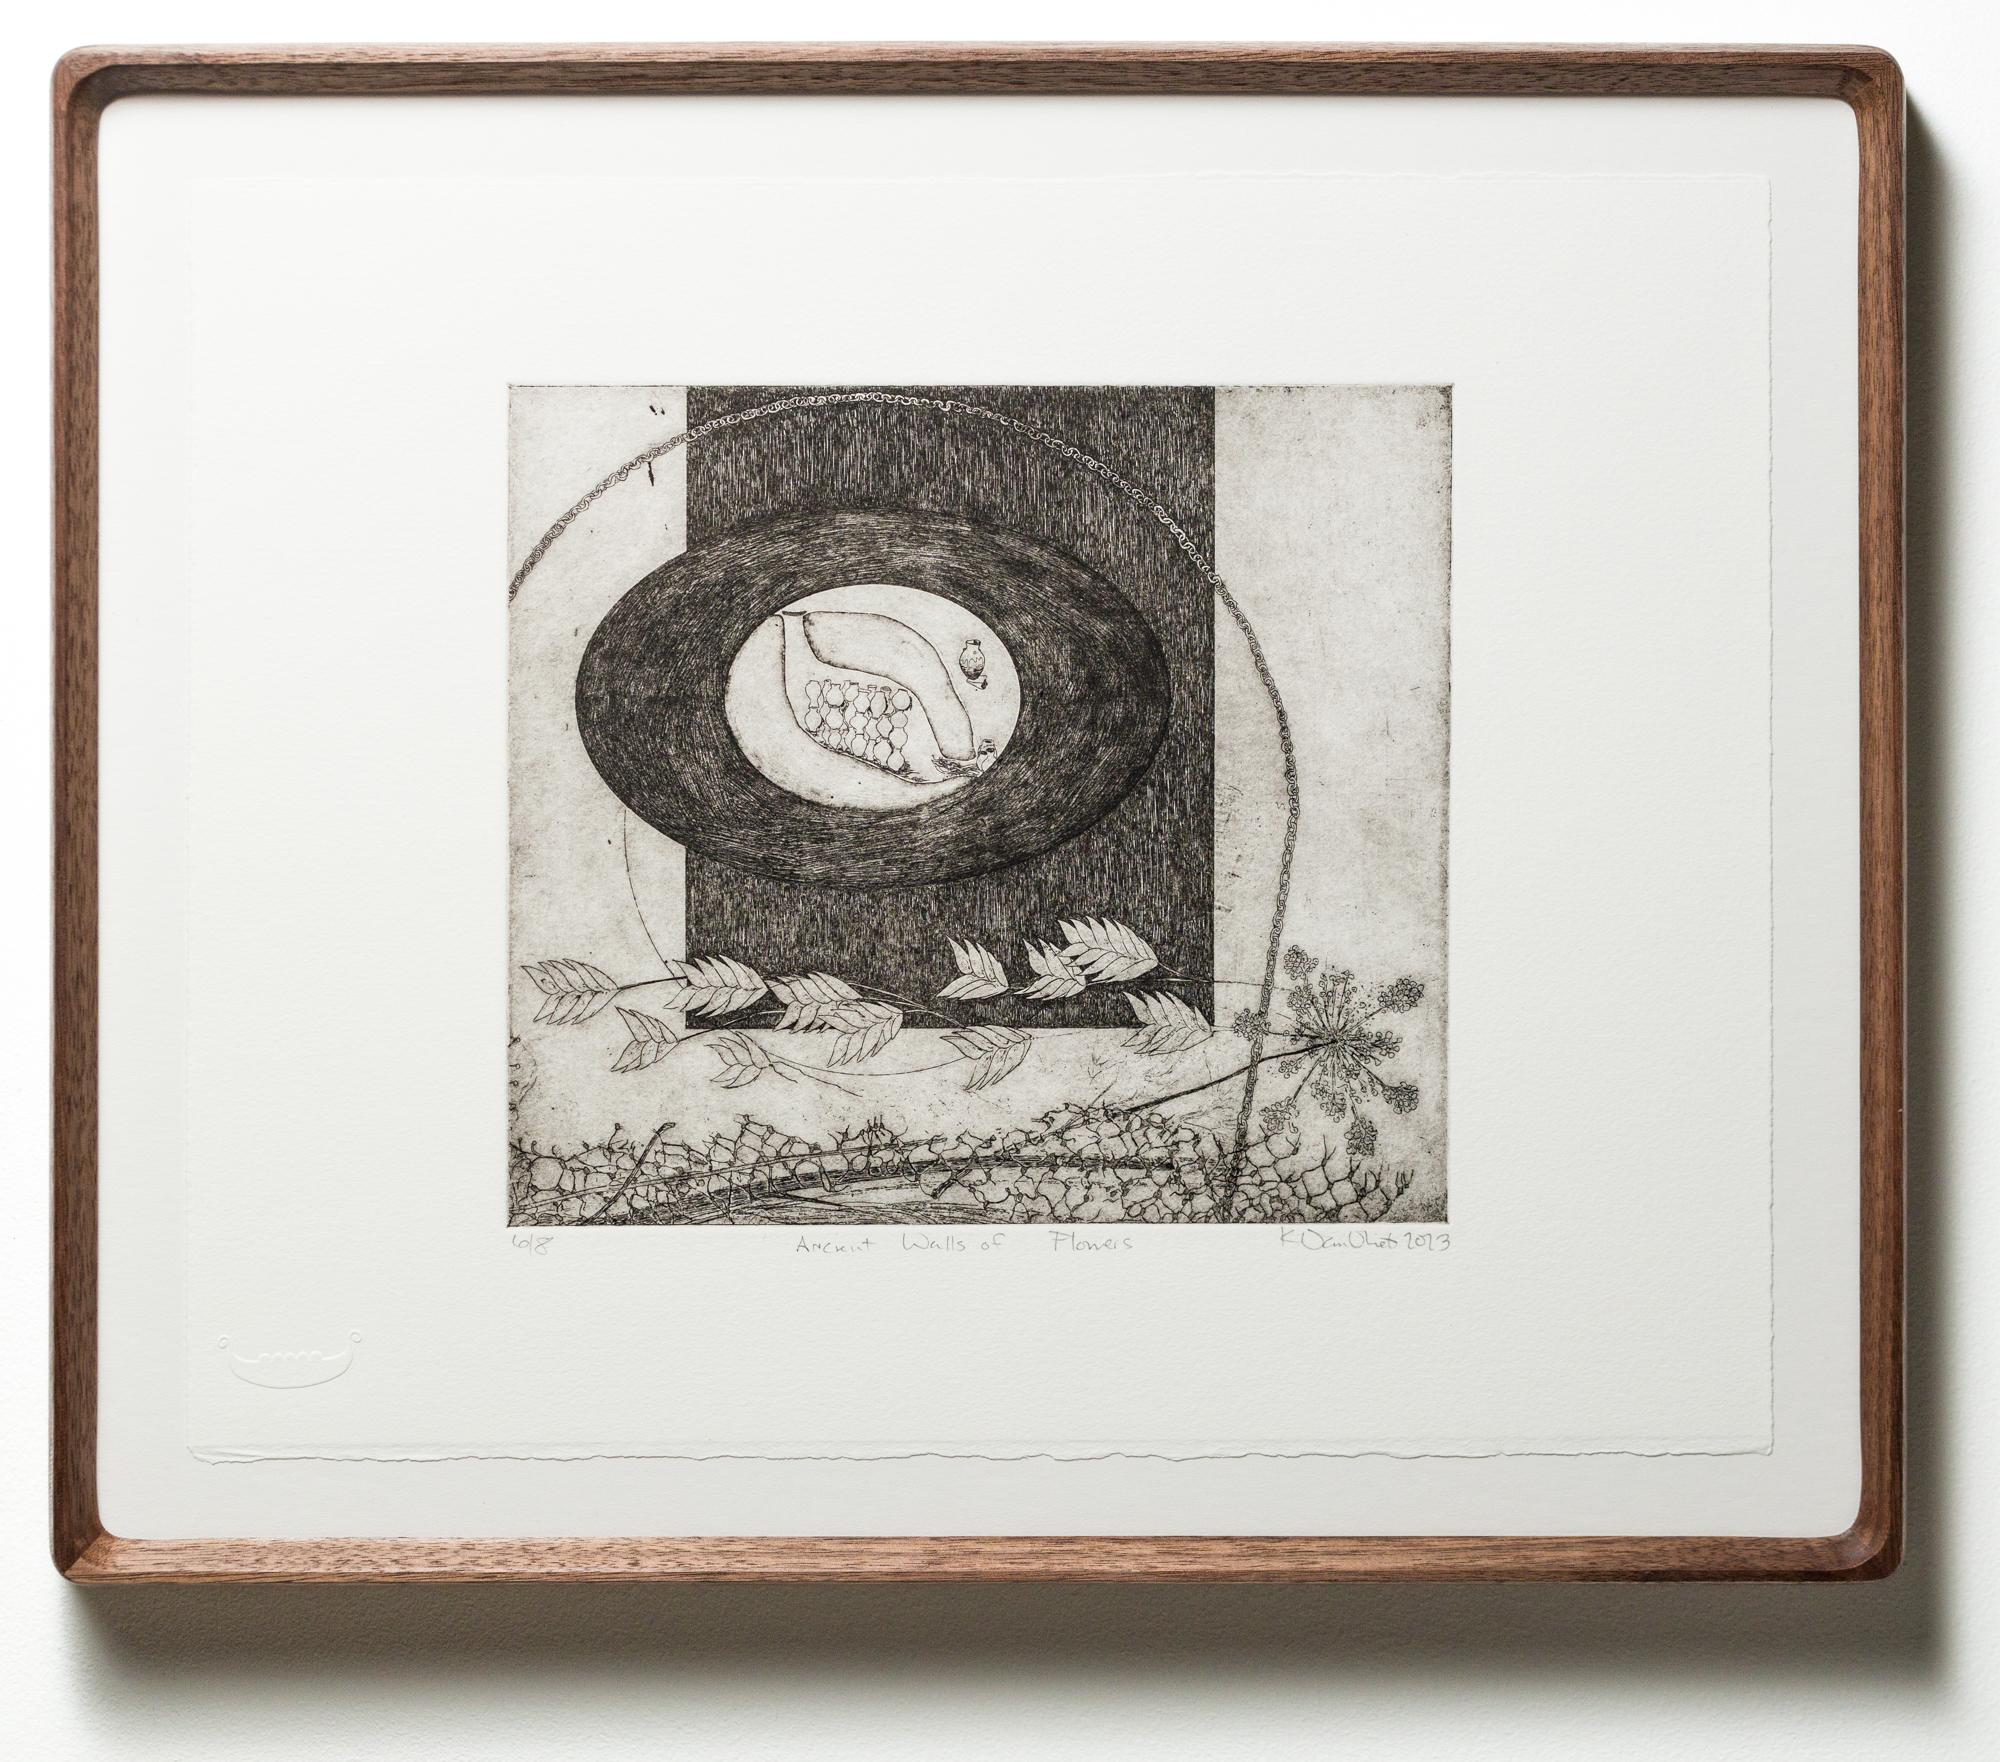 This piece titled "Ancient Walls of Flowers" is a limited edition piece by Kate VanVliet and is made from intaglio with soft ground on Rives BFK, artist-made frame. This piece is an edition of 8, measures 14.5"h x 17.5"w, and is shipped in the